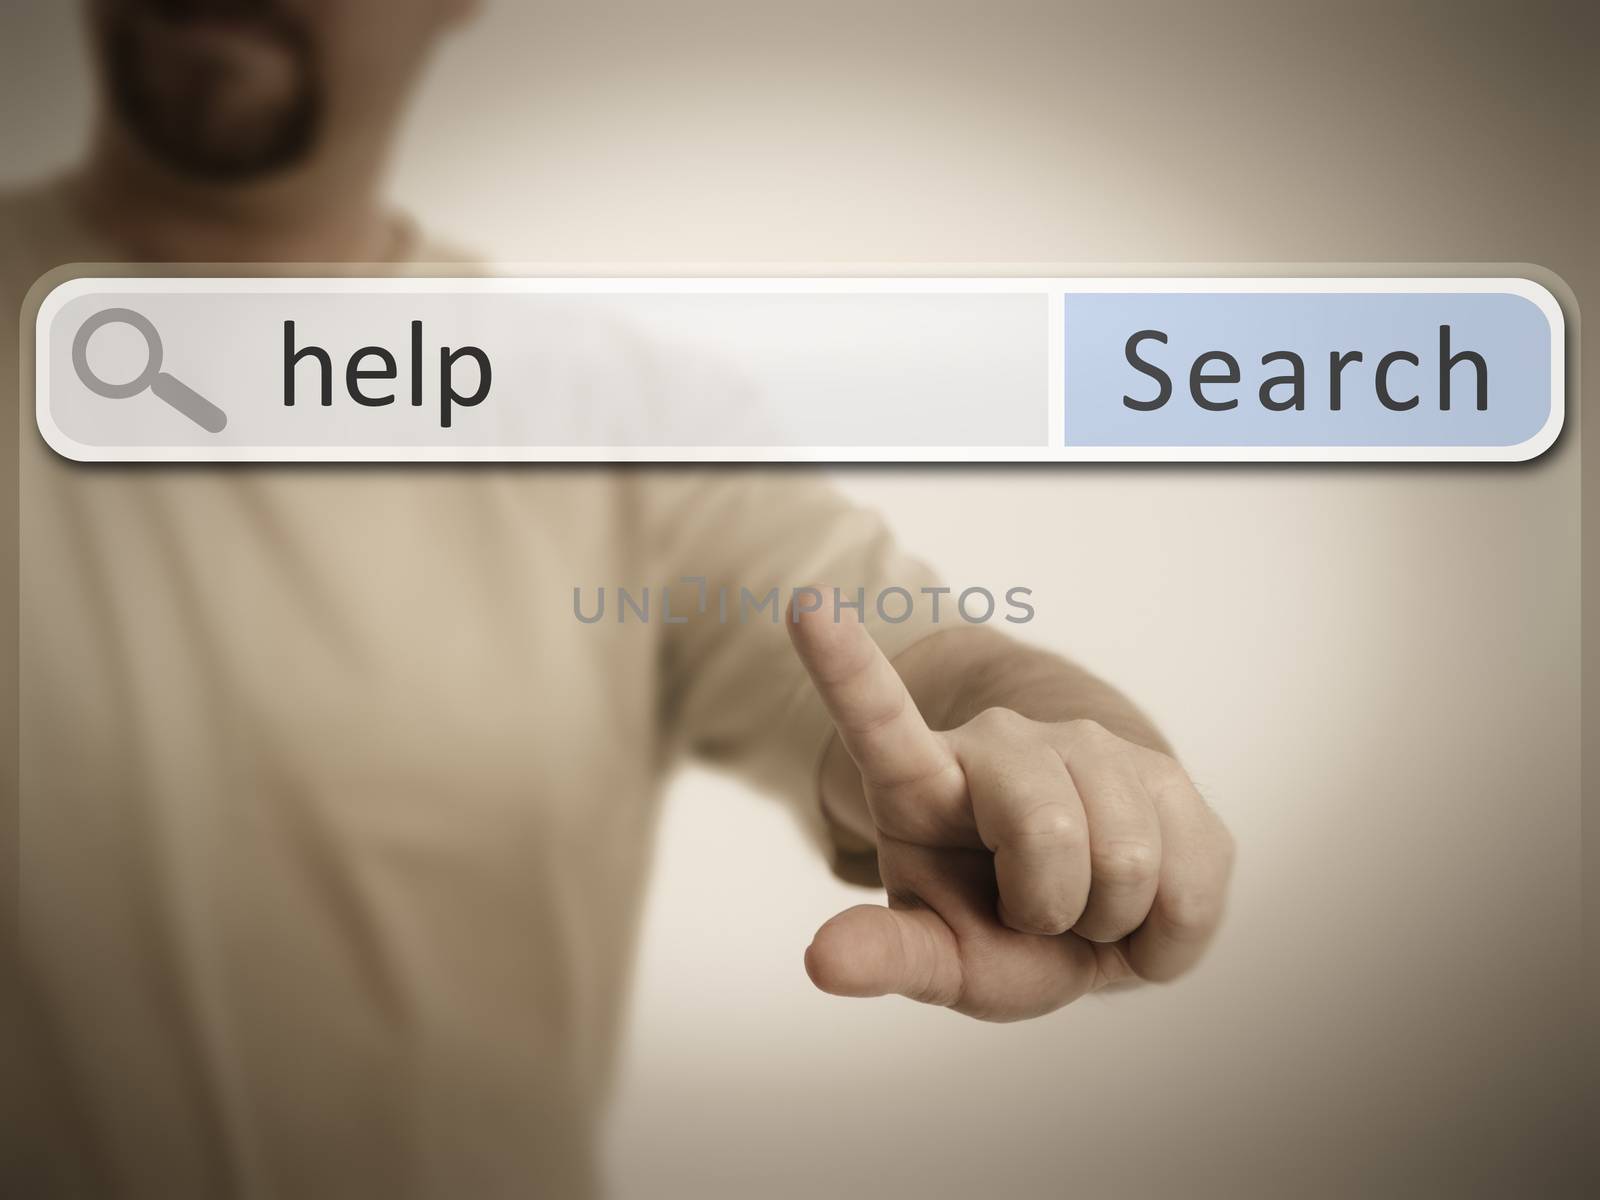 An image of a man who is searching the web after help